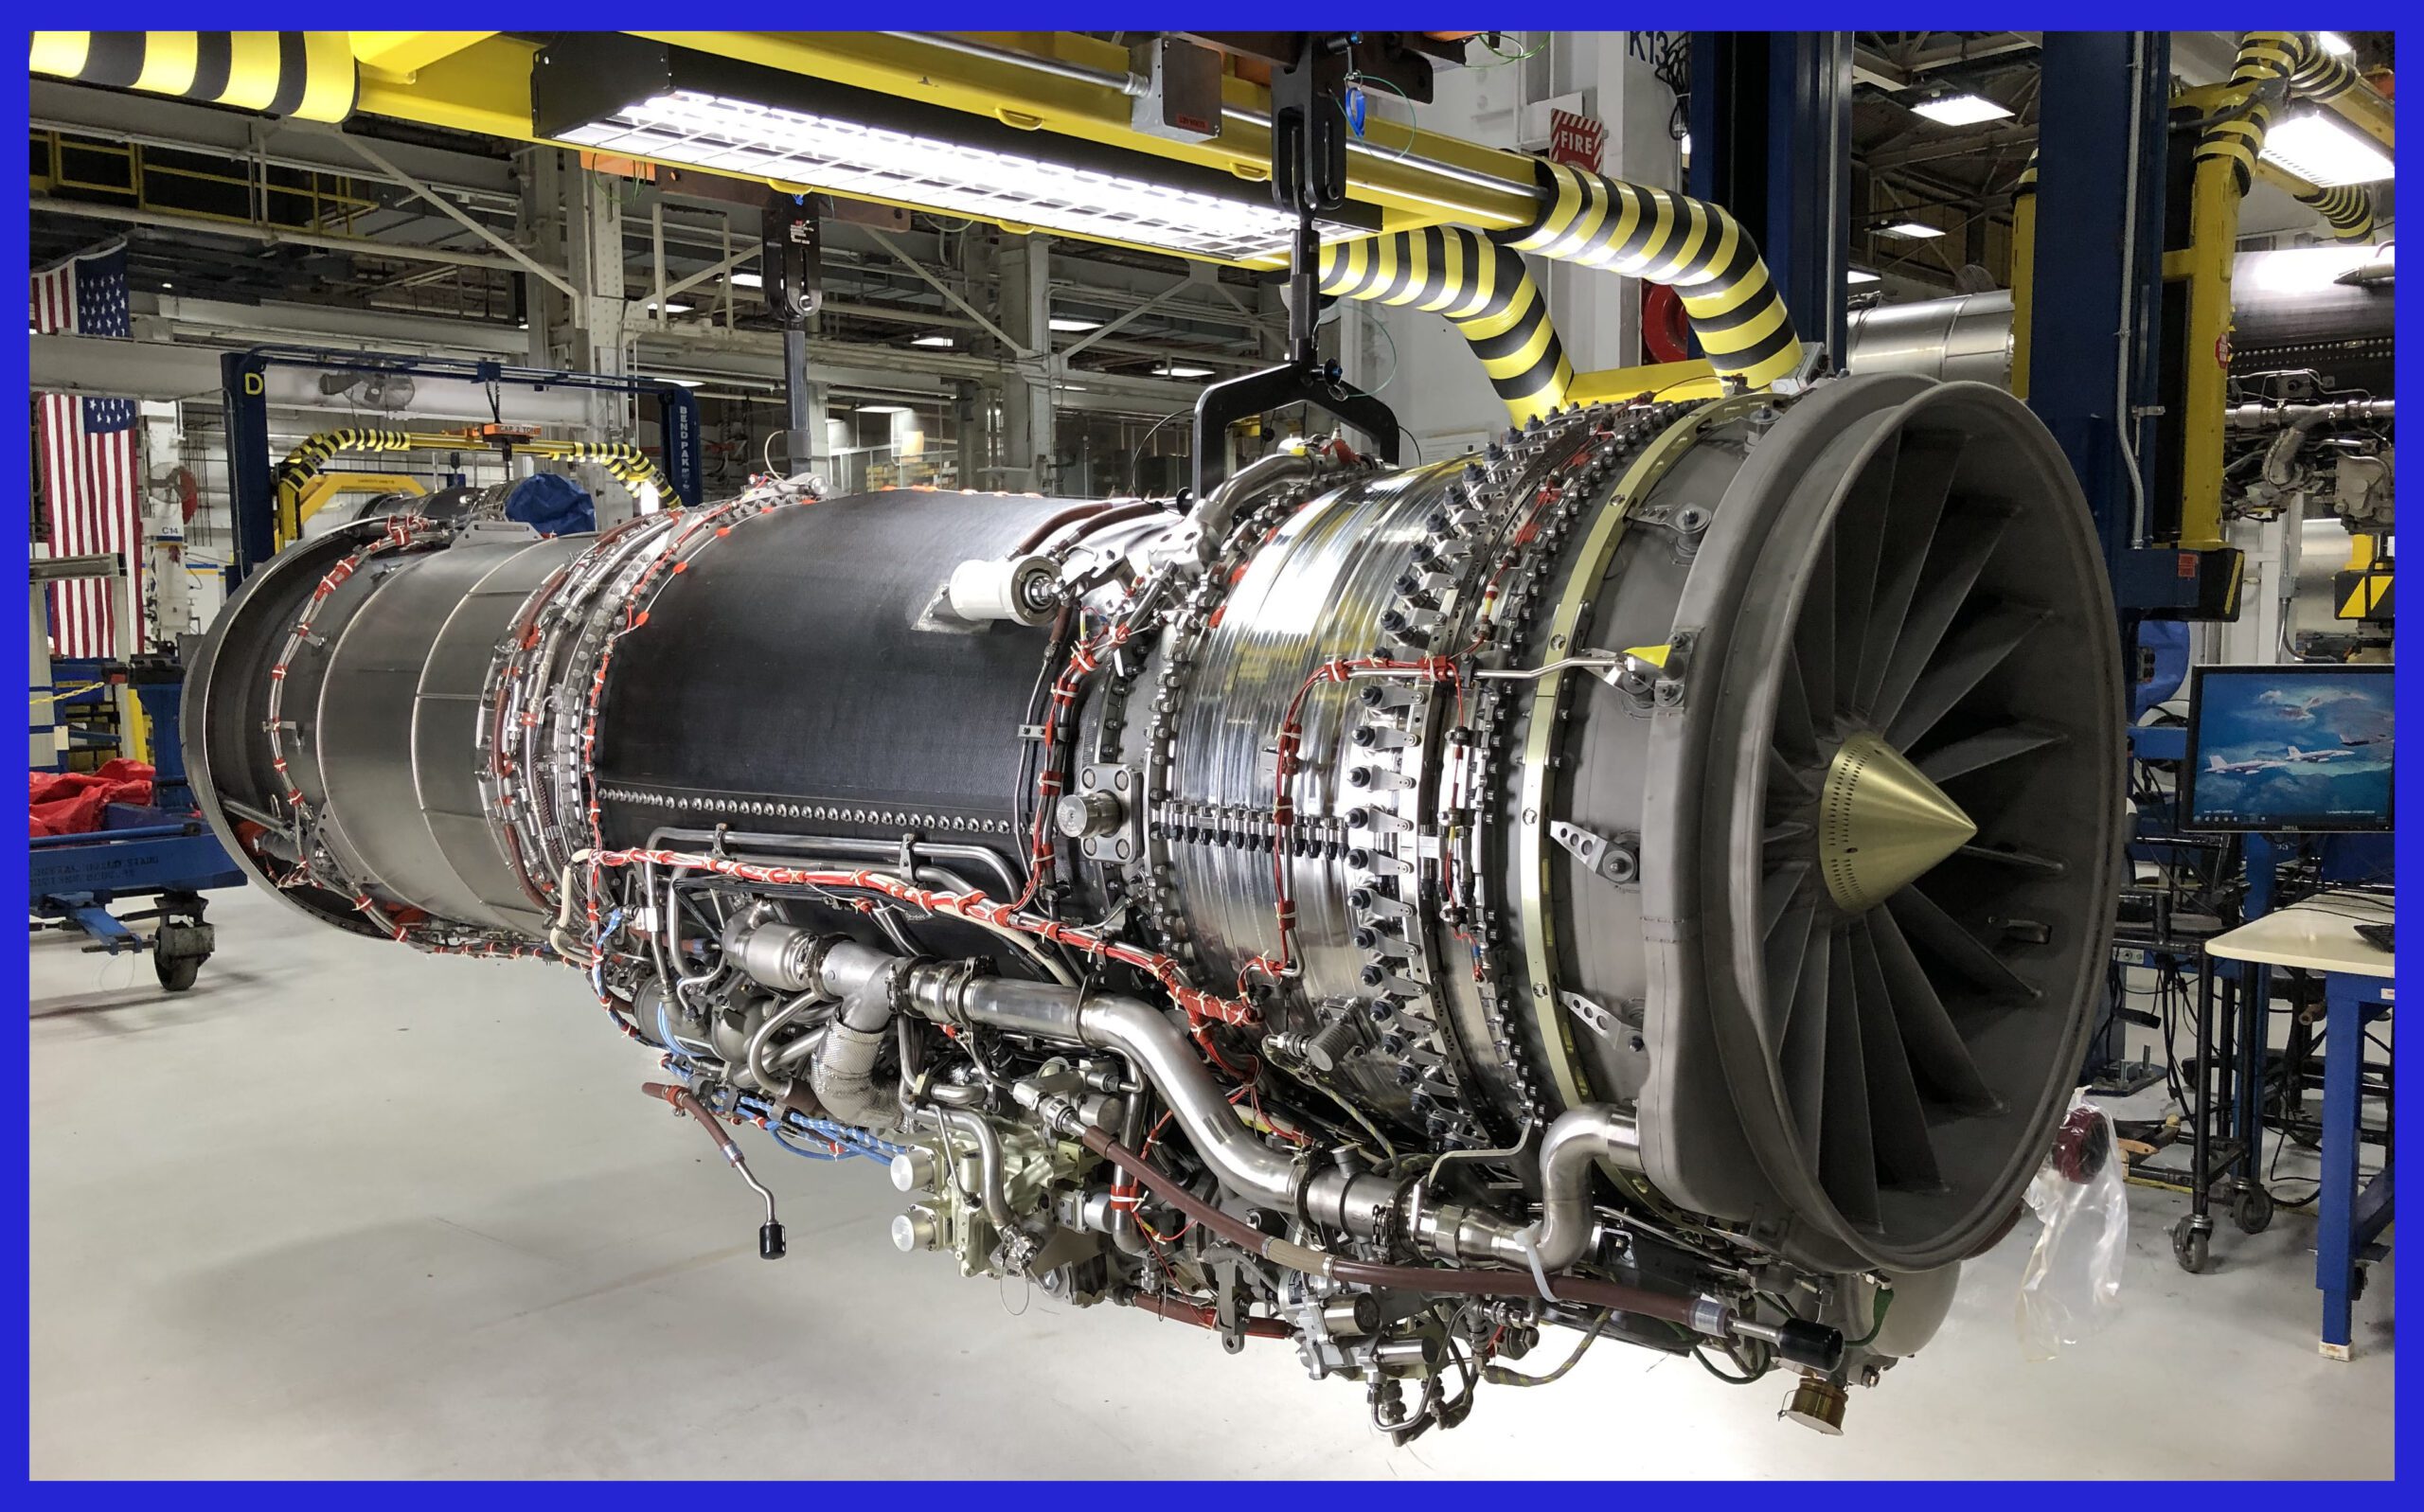 Photo Credit: NASA / Comprehensive Details of the GE F414 and F404 Engines